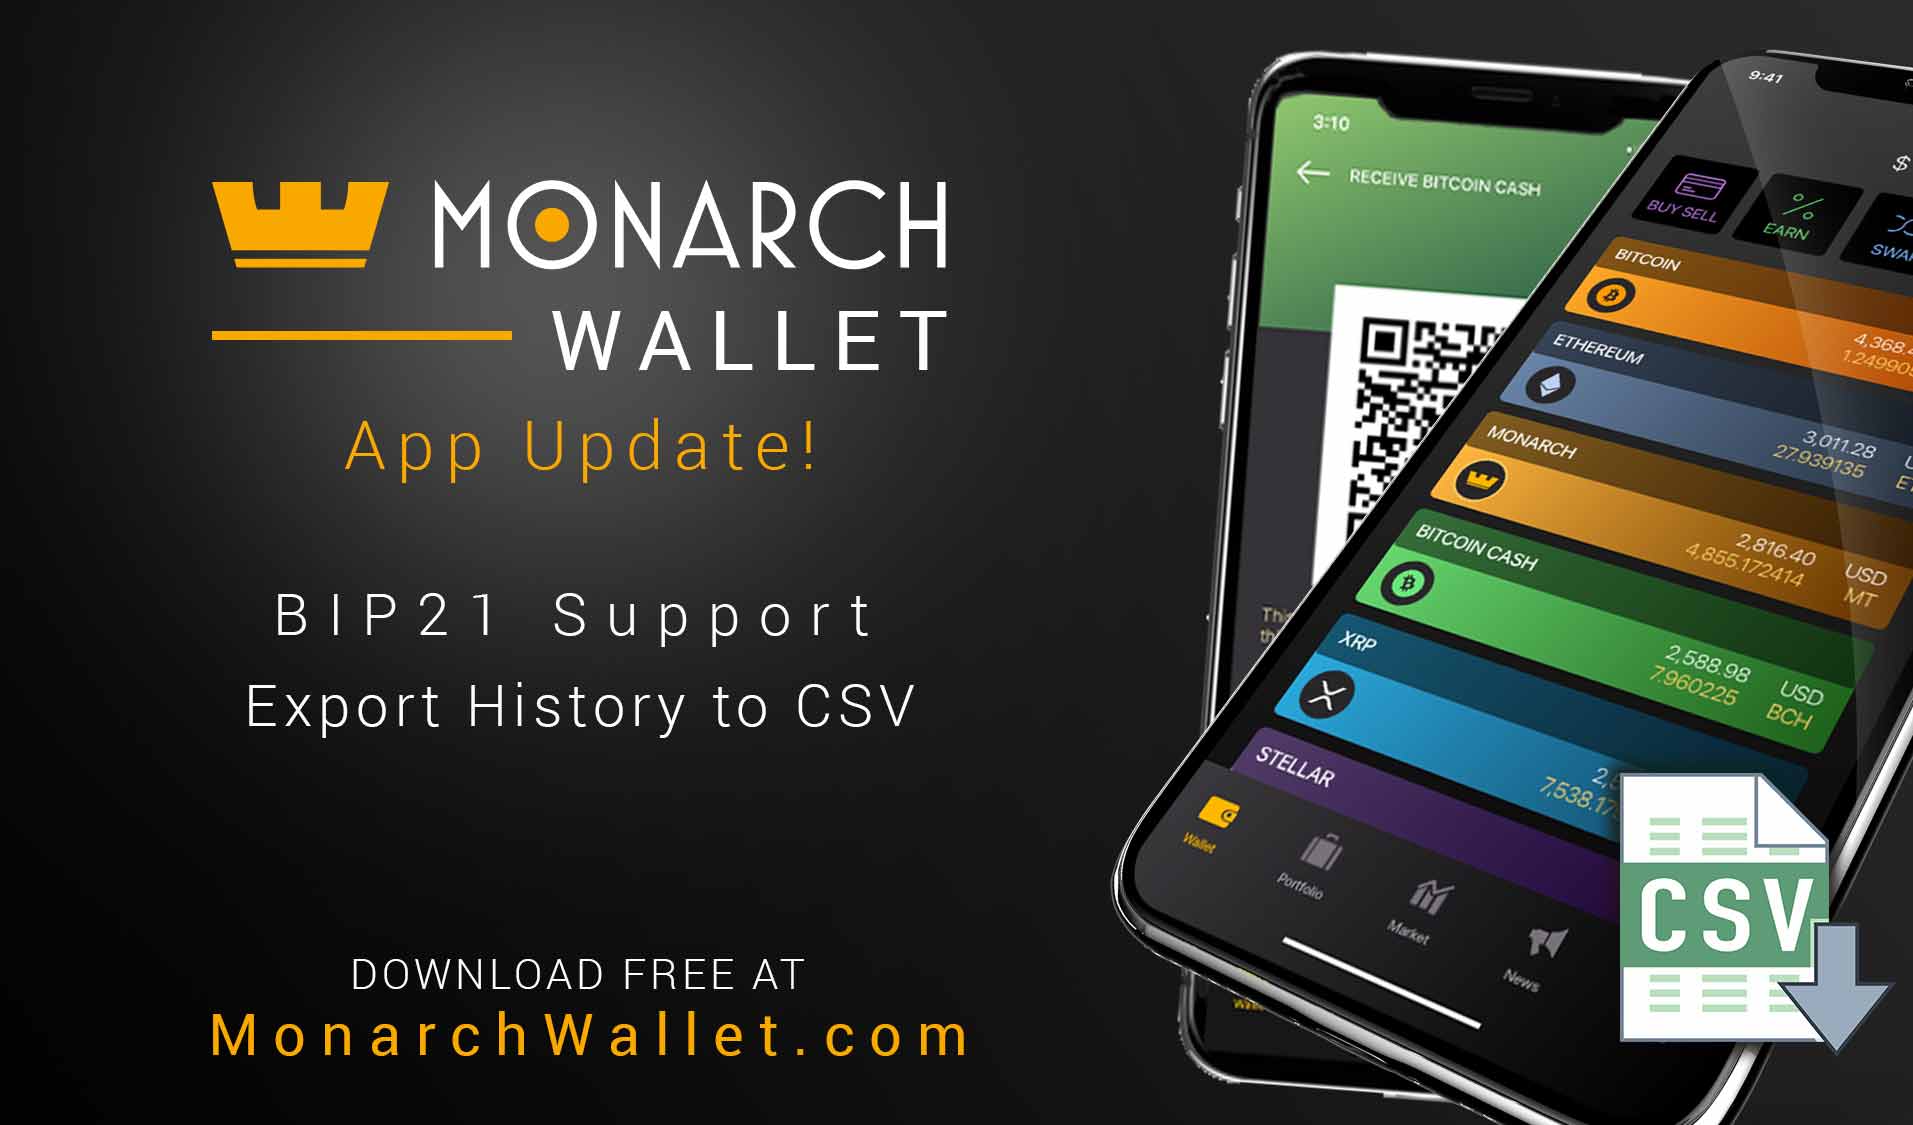 Monarch Wallet App Update Adds Crypto Transaction Export & BIP 21 QR Support!